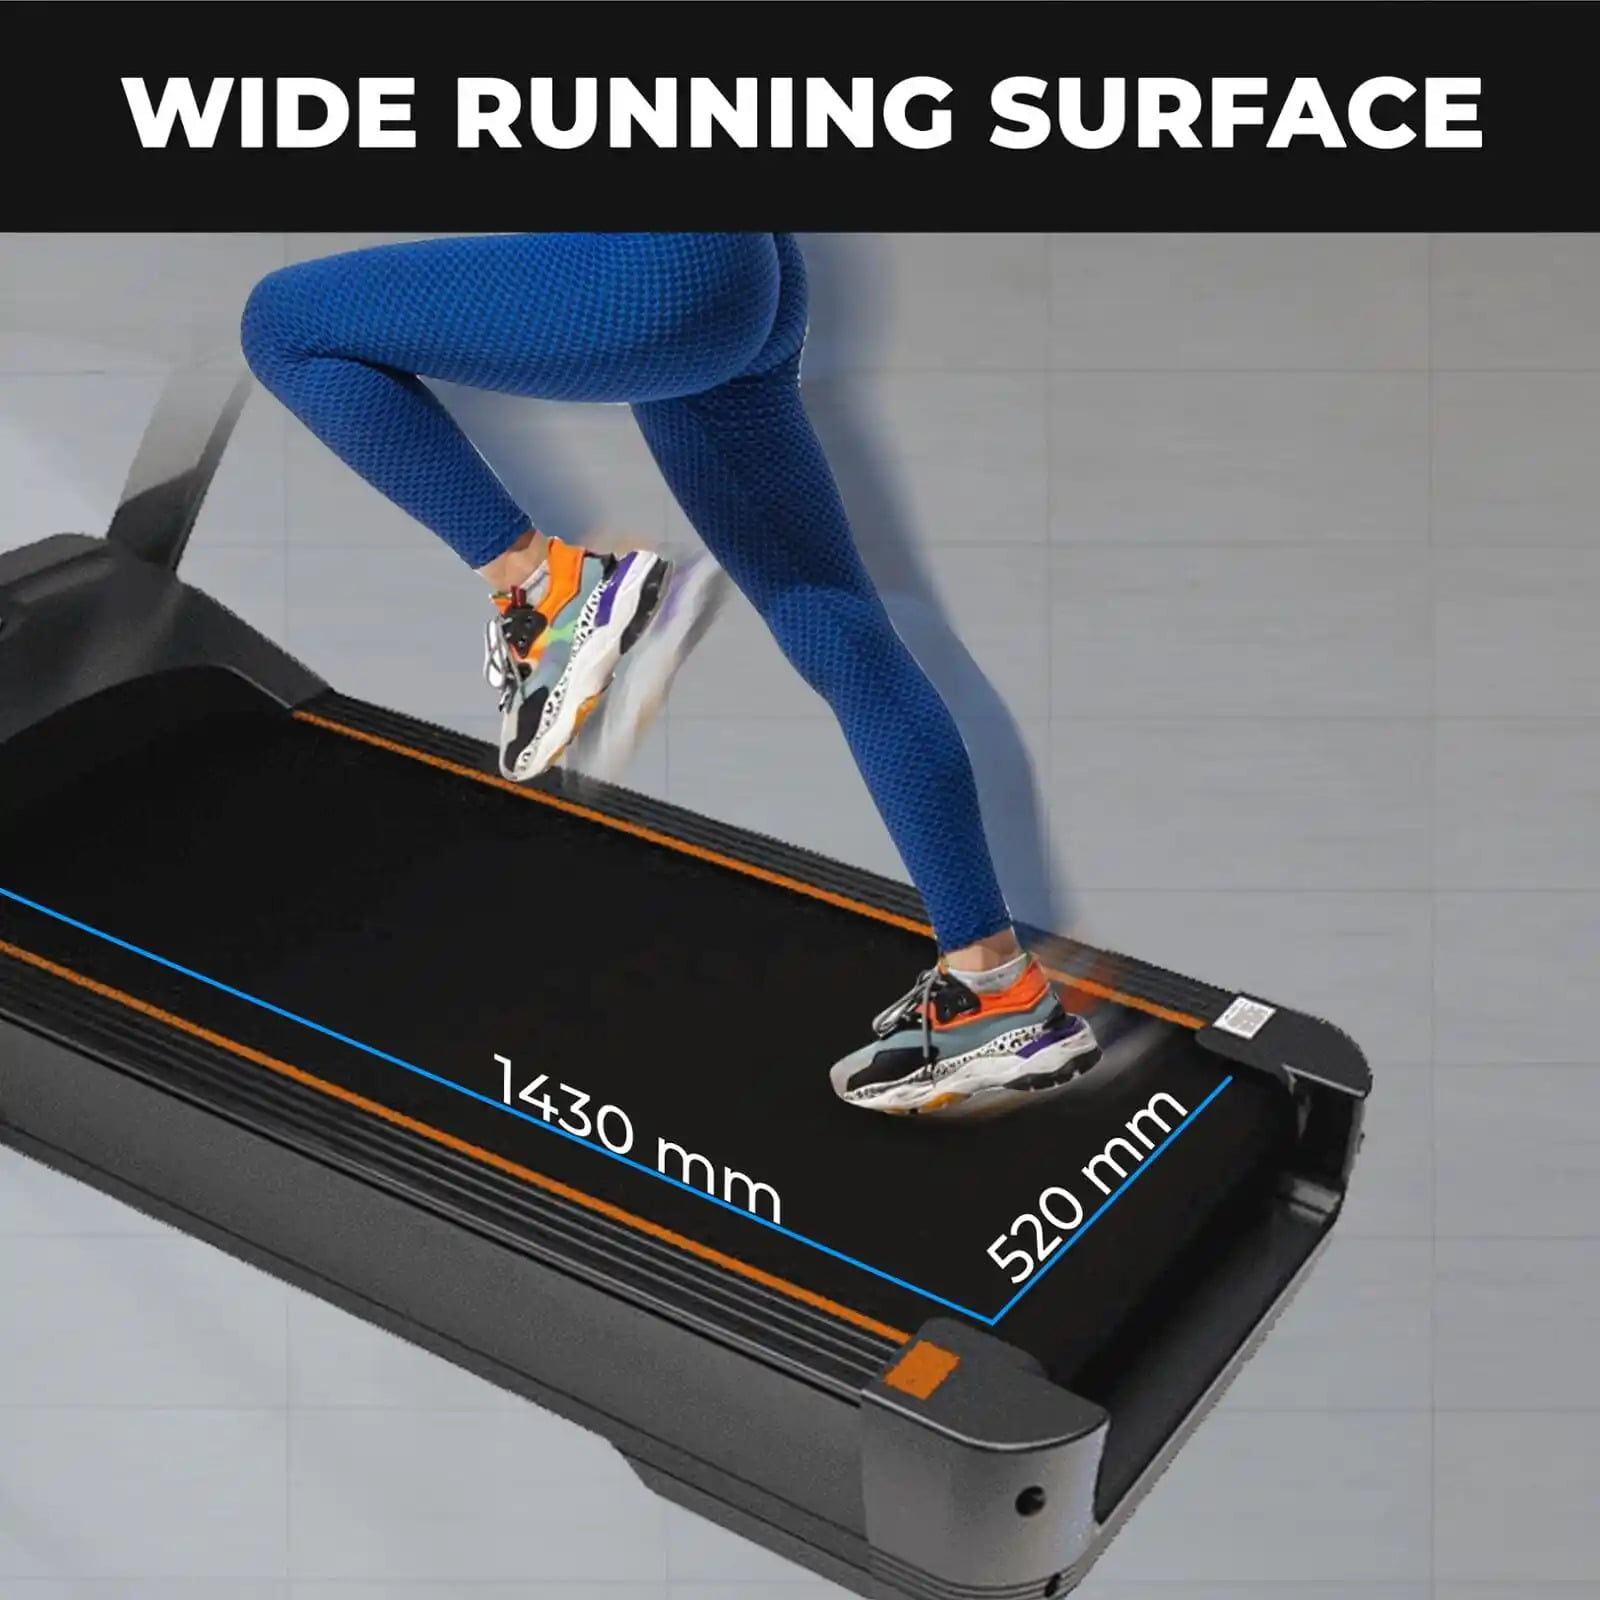 Durafit Champion Treadmill with Wide Running Surface